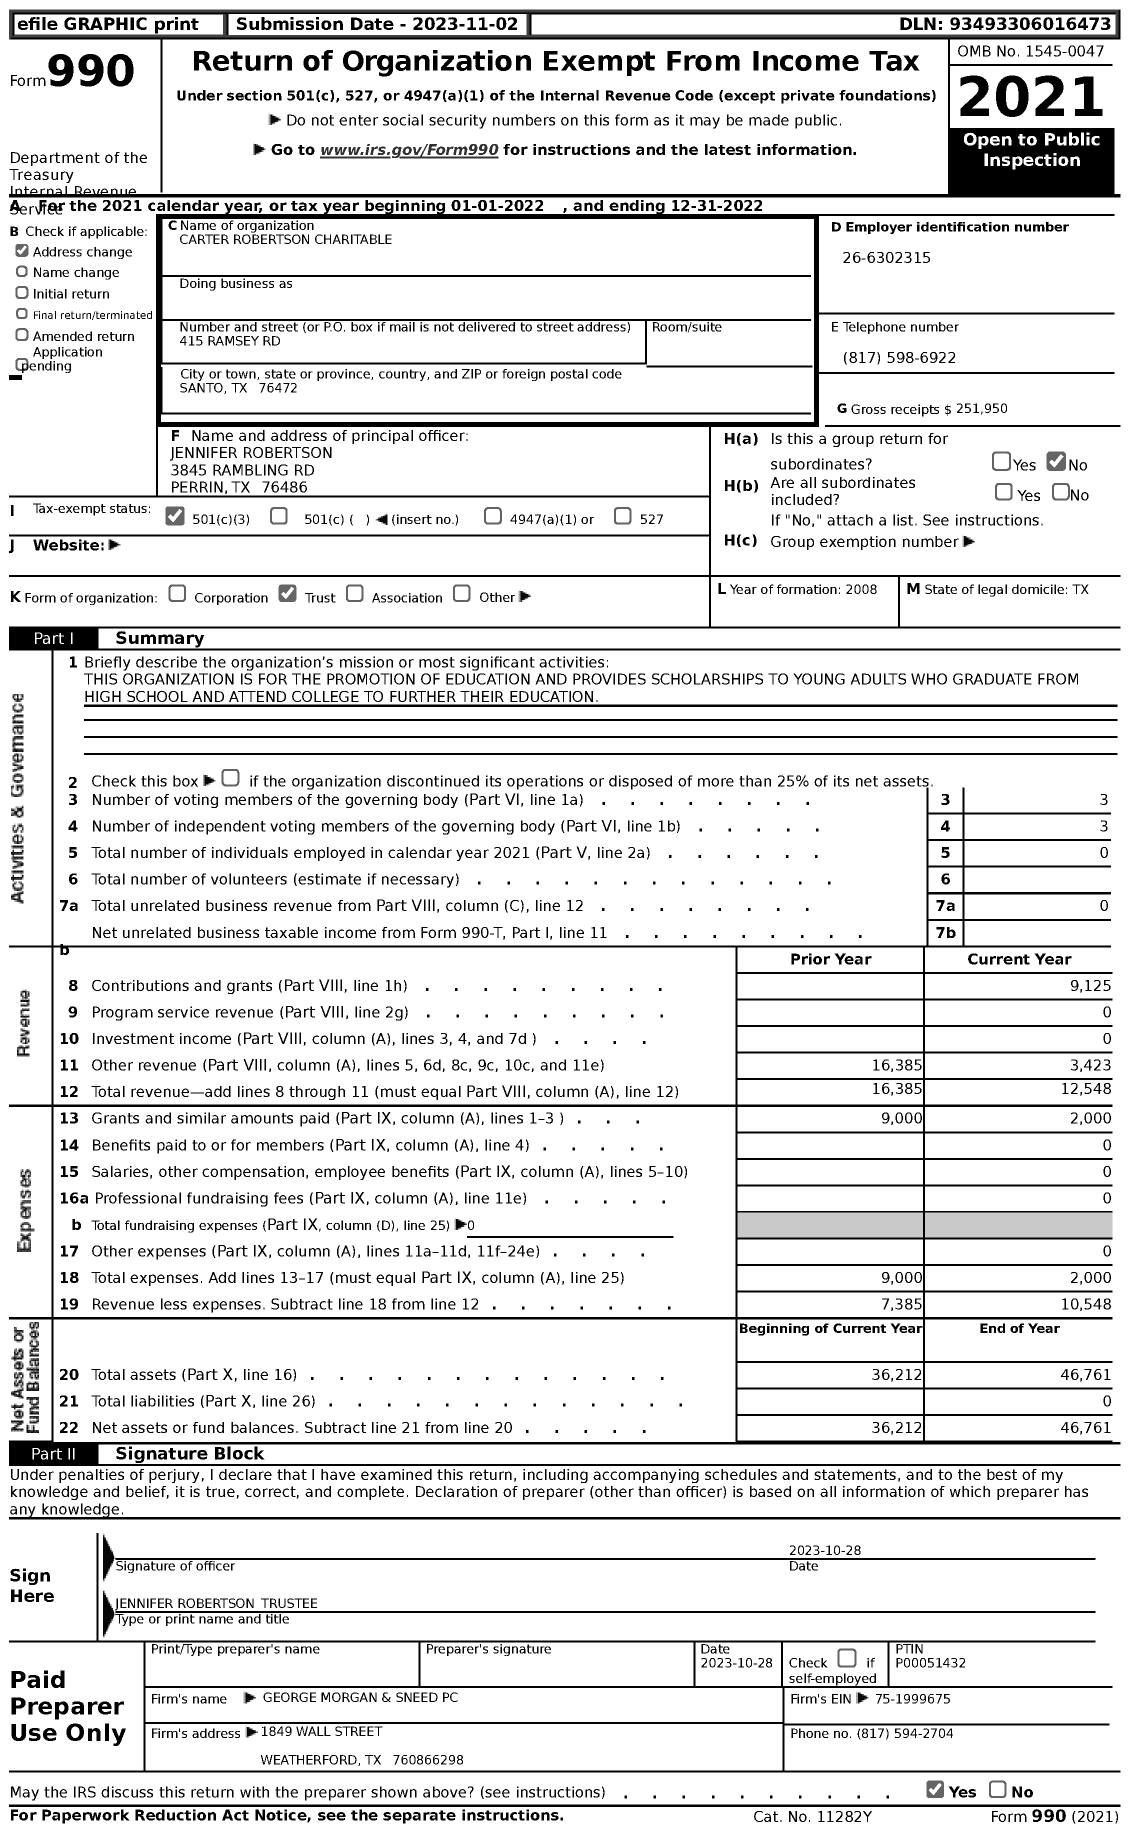 Image of first page of 2022 Form 990 for Carter Robertson Charitable